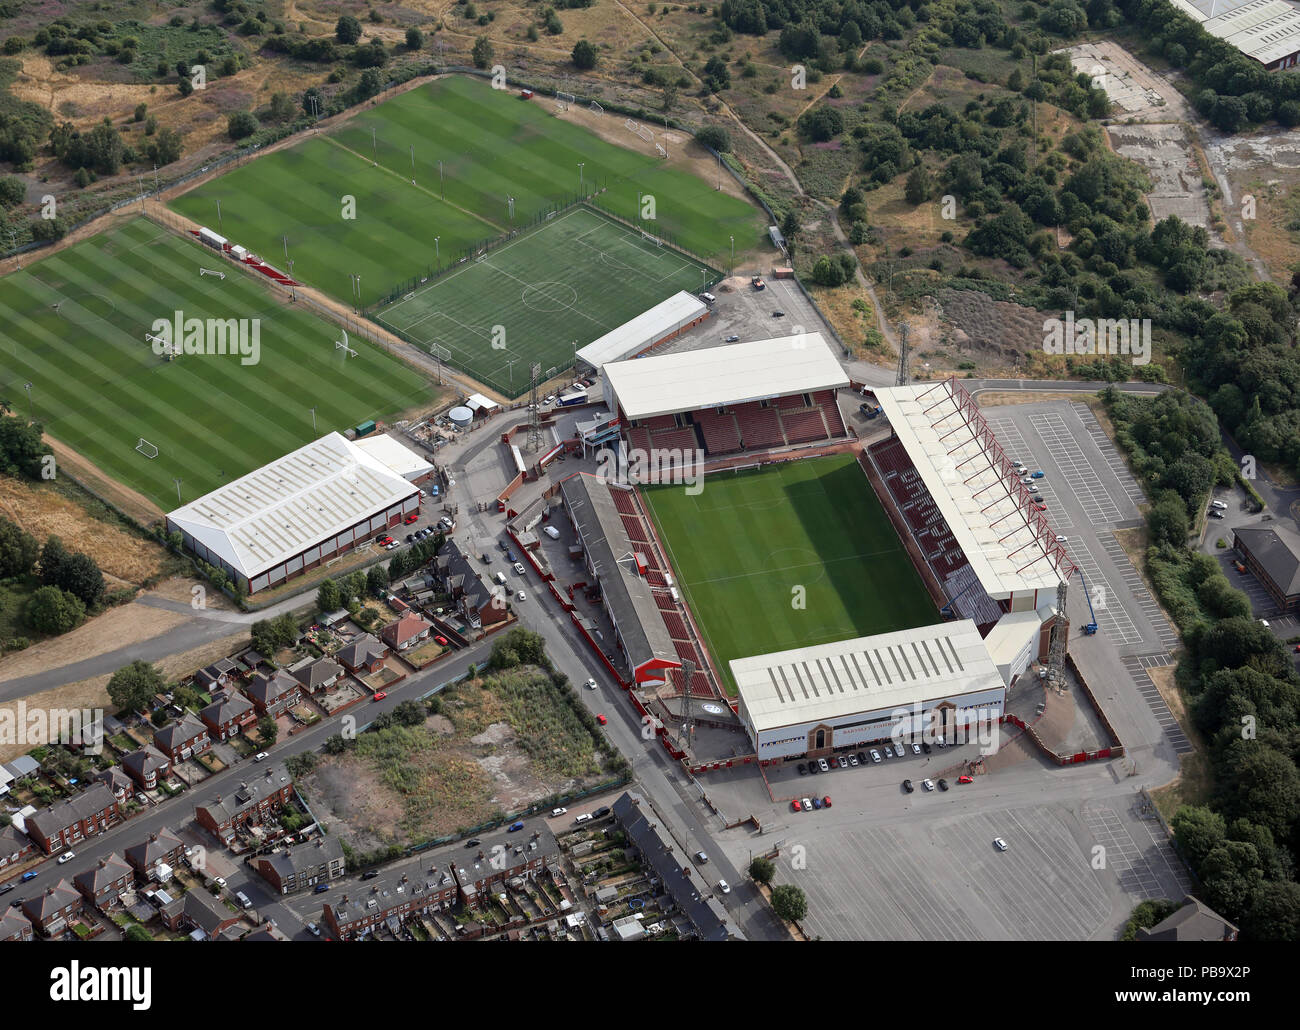 aerial view of Barnsley football ground Stock Photo